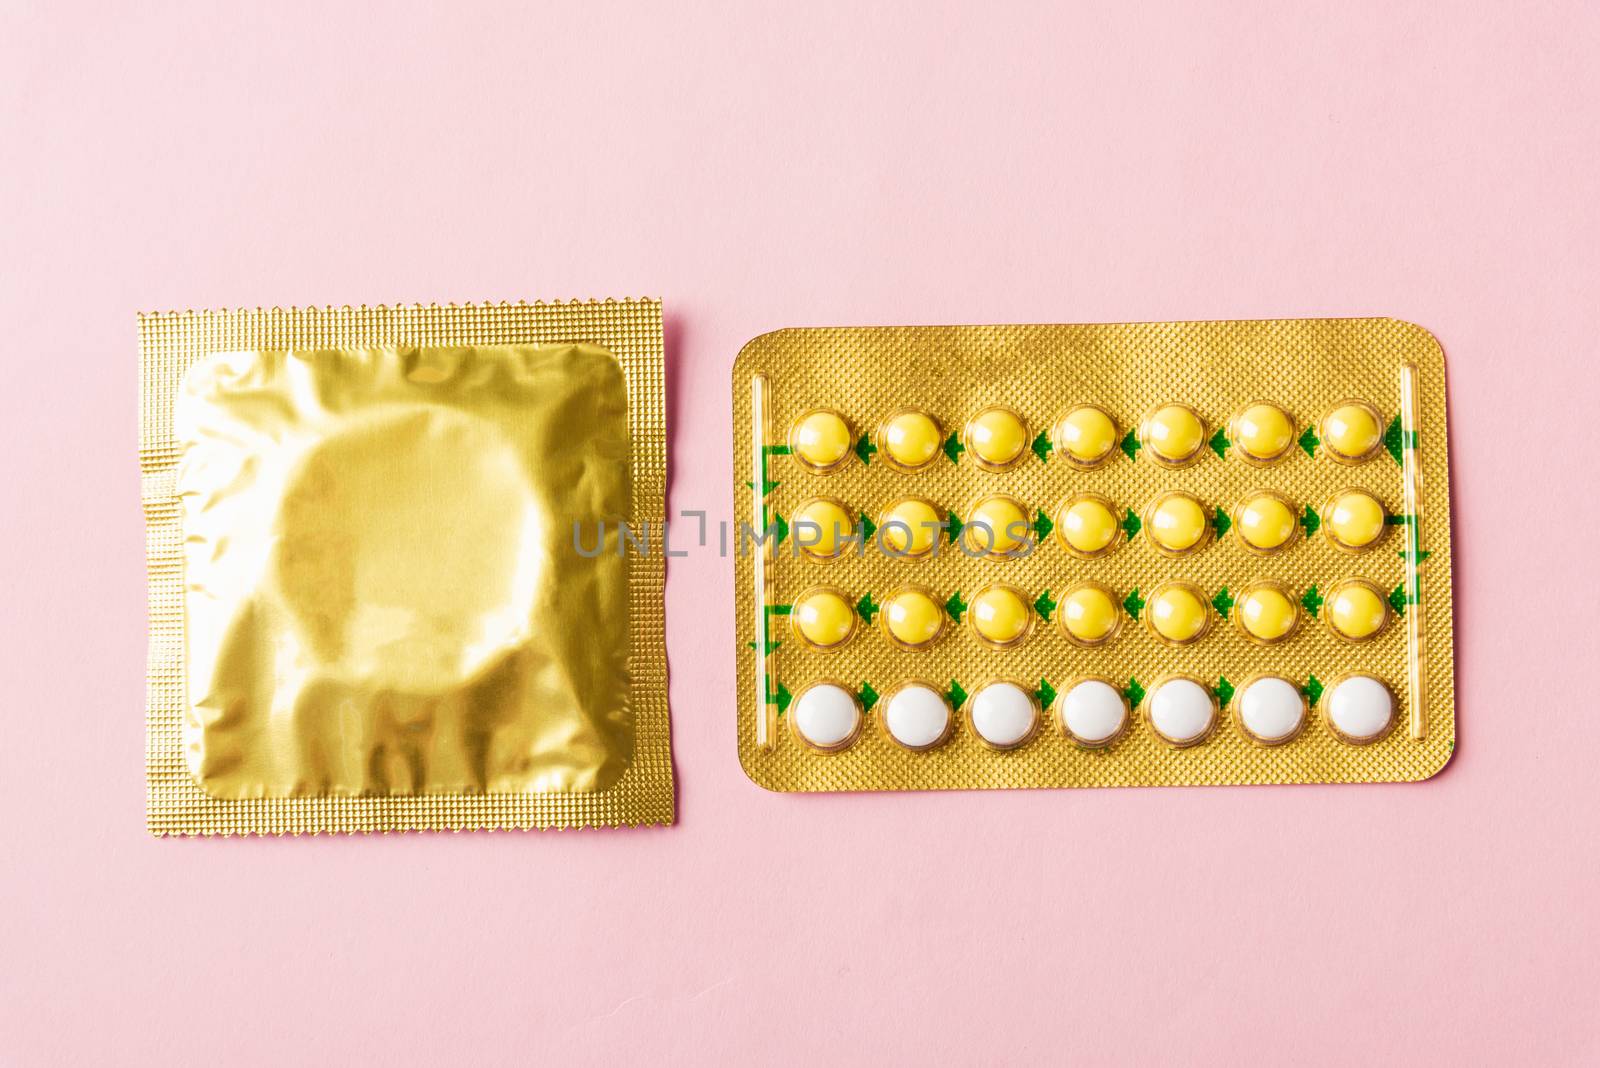 World sexual health or Aids day, condom in wrapper pack and contraceptive pills blister hormonal birth control pills, studio shot isolated on a pink background, Safe sex and reproductive health concept